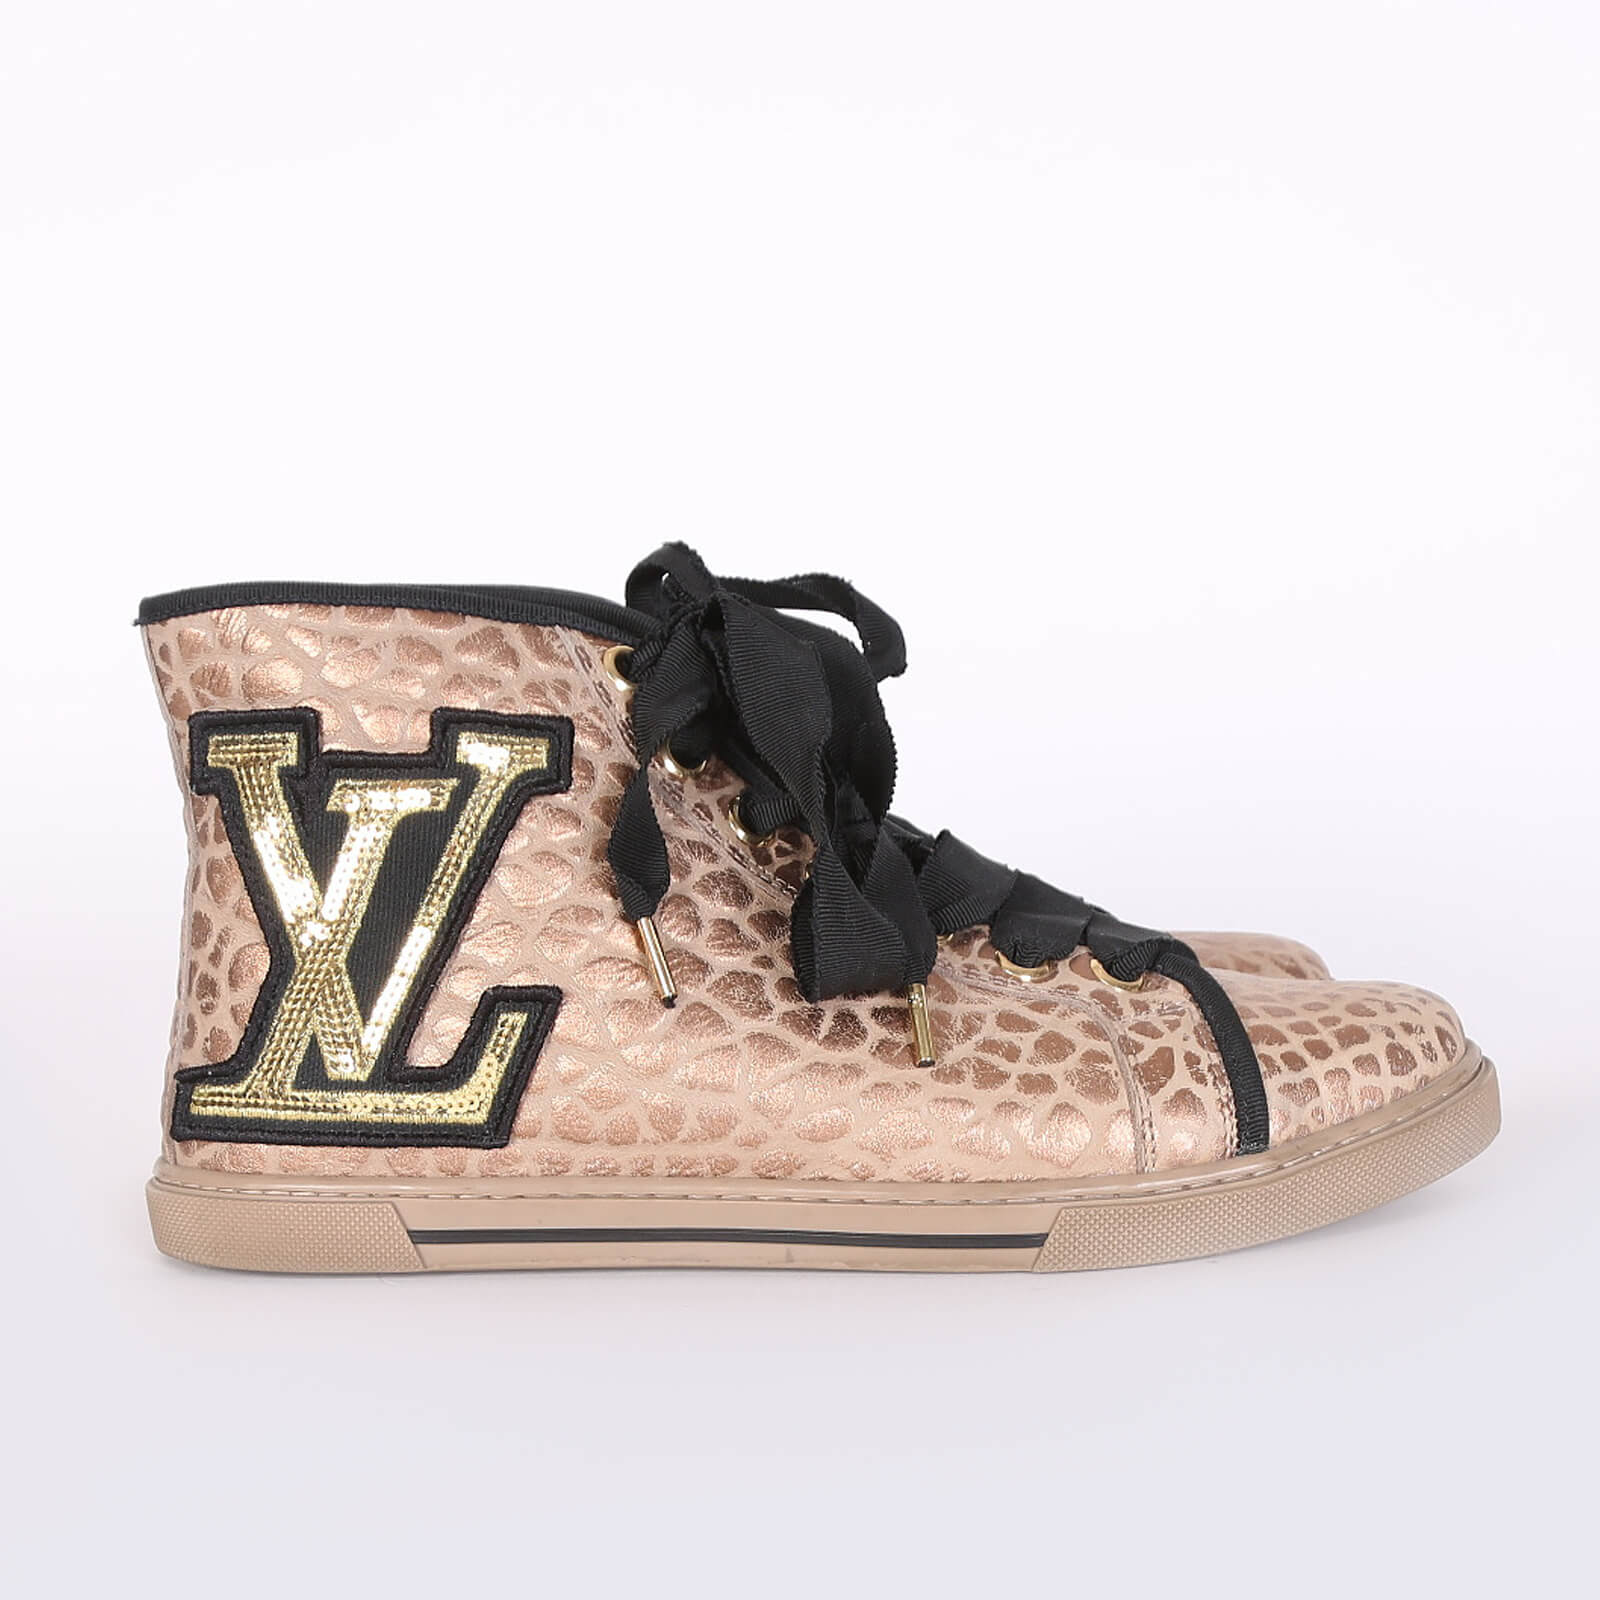 Sneakers Louis Vuitton Louis Vuitton Punchy Empreinte Leather High Top Sneakers Ivory Off White Sz 37,5